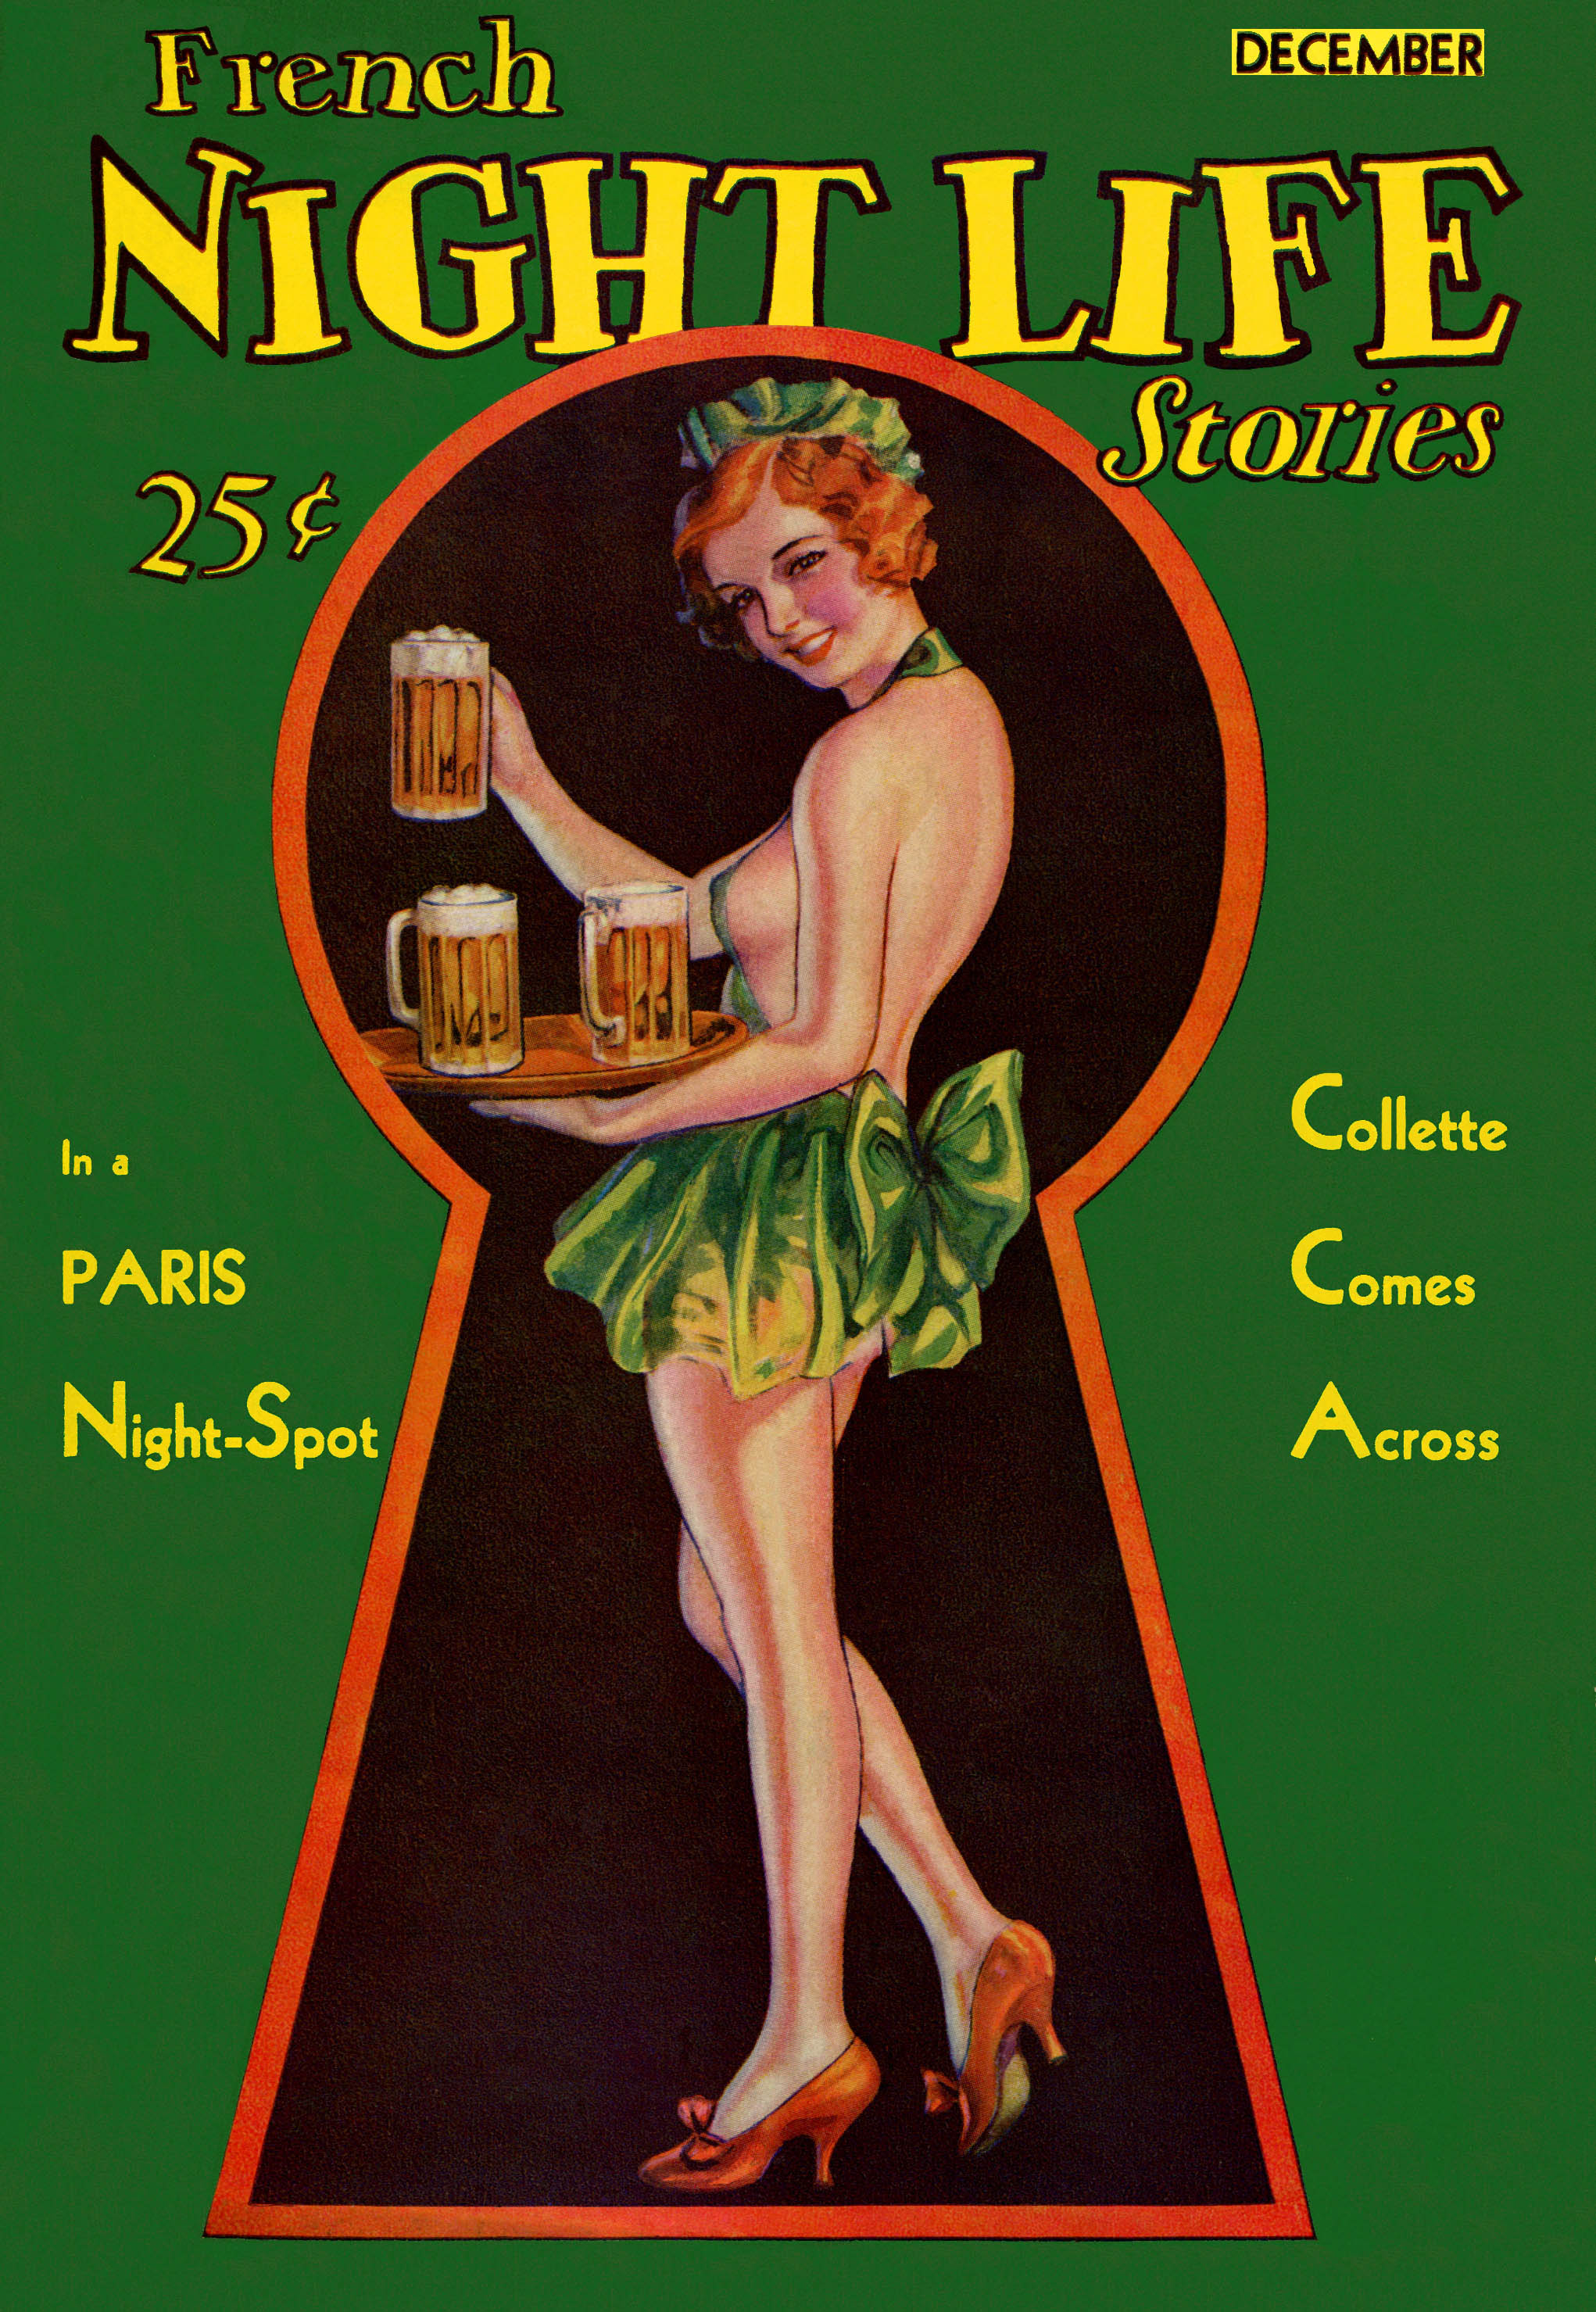 French Night Life Stories December 1933